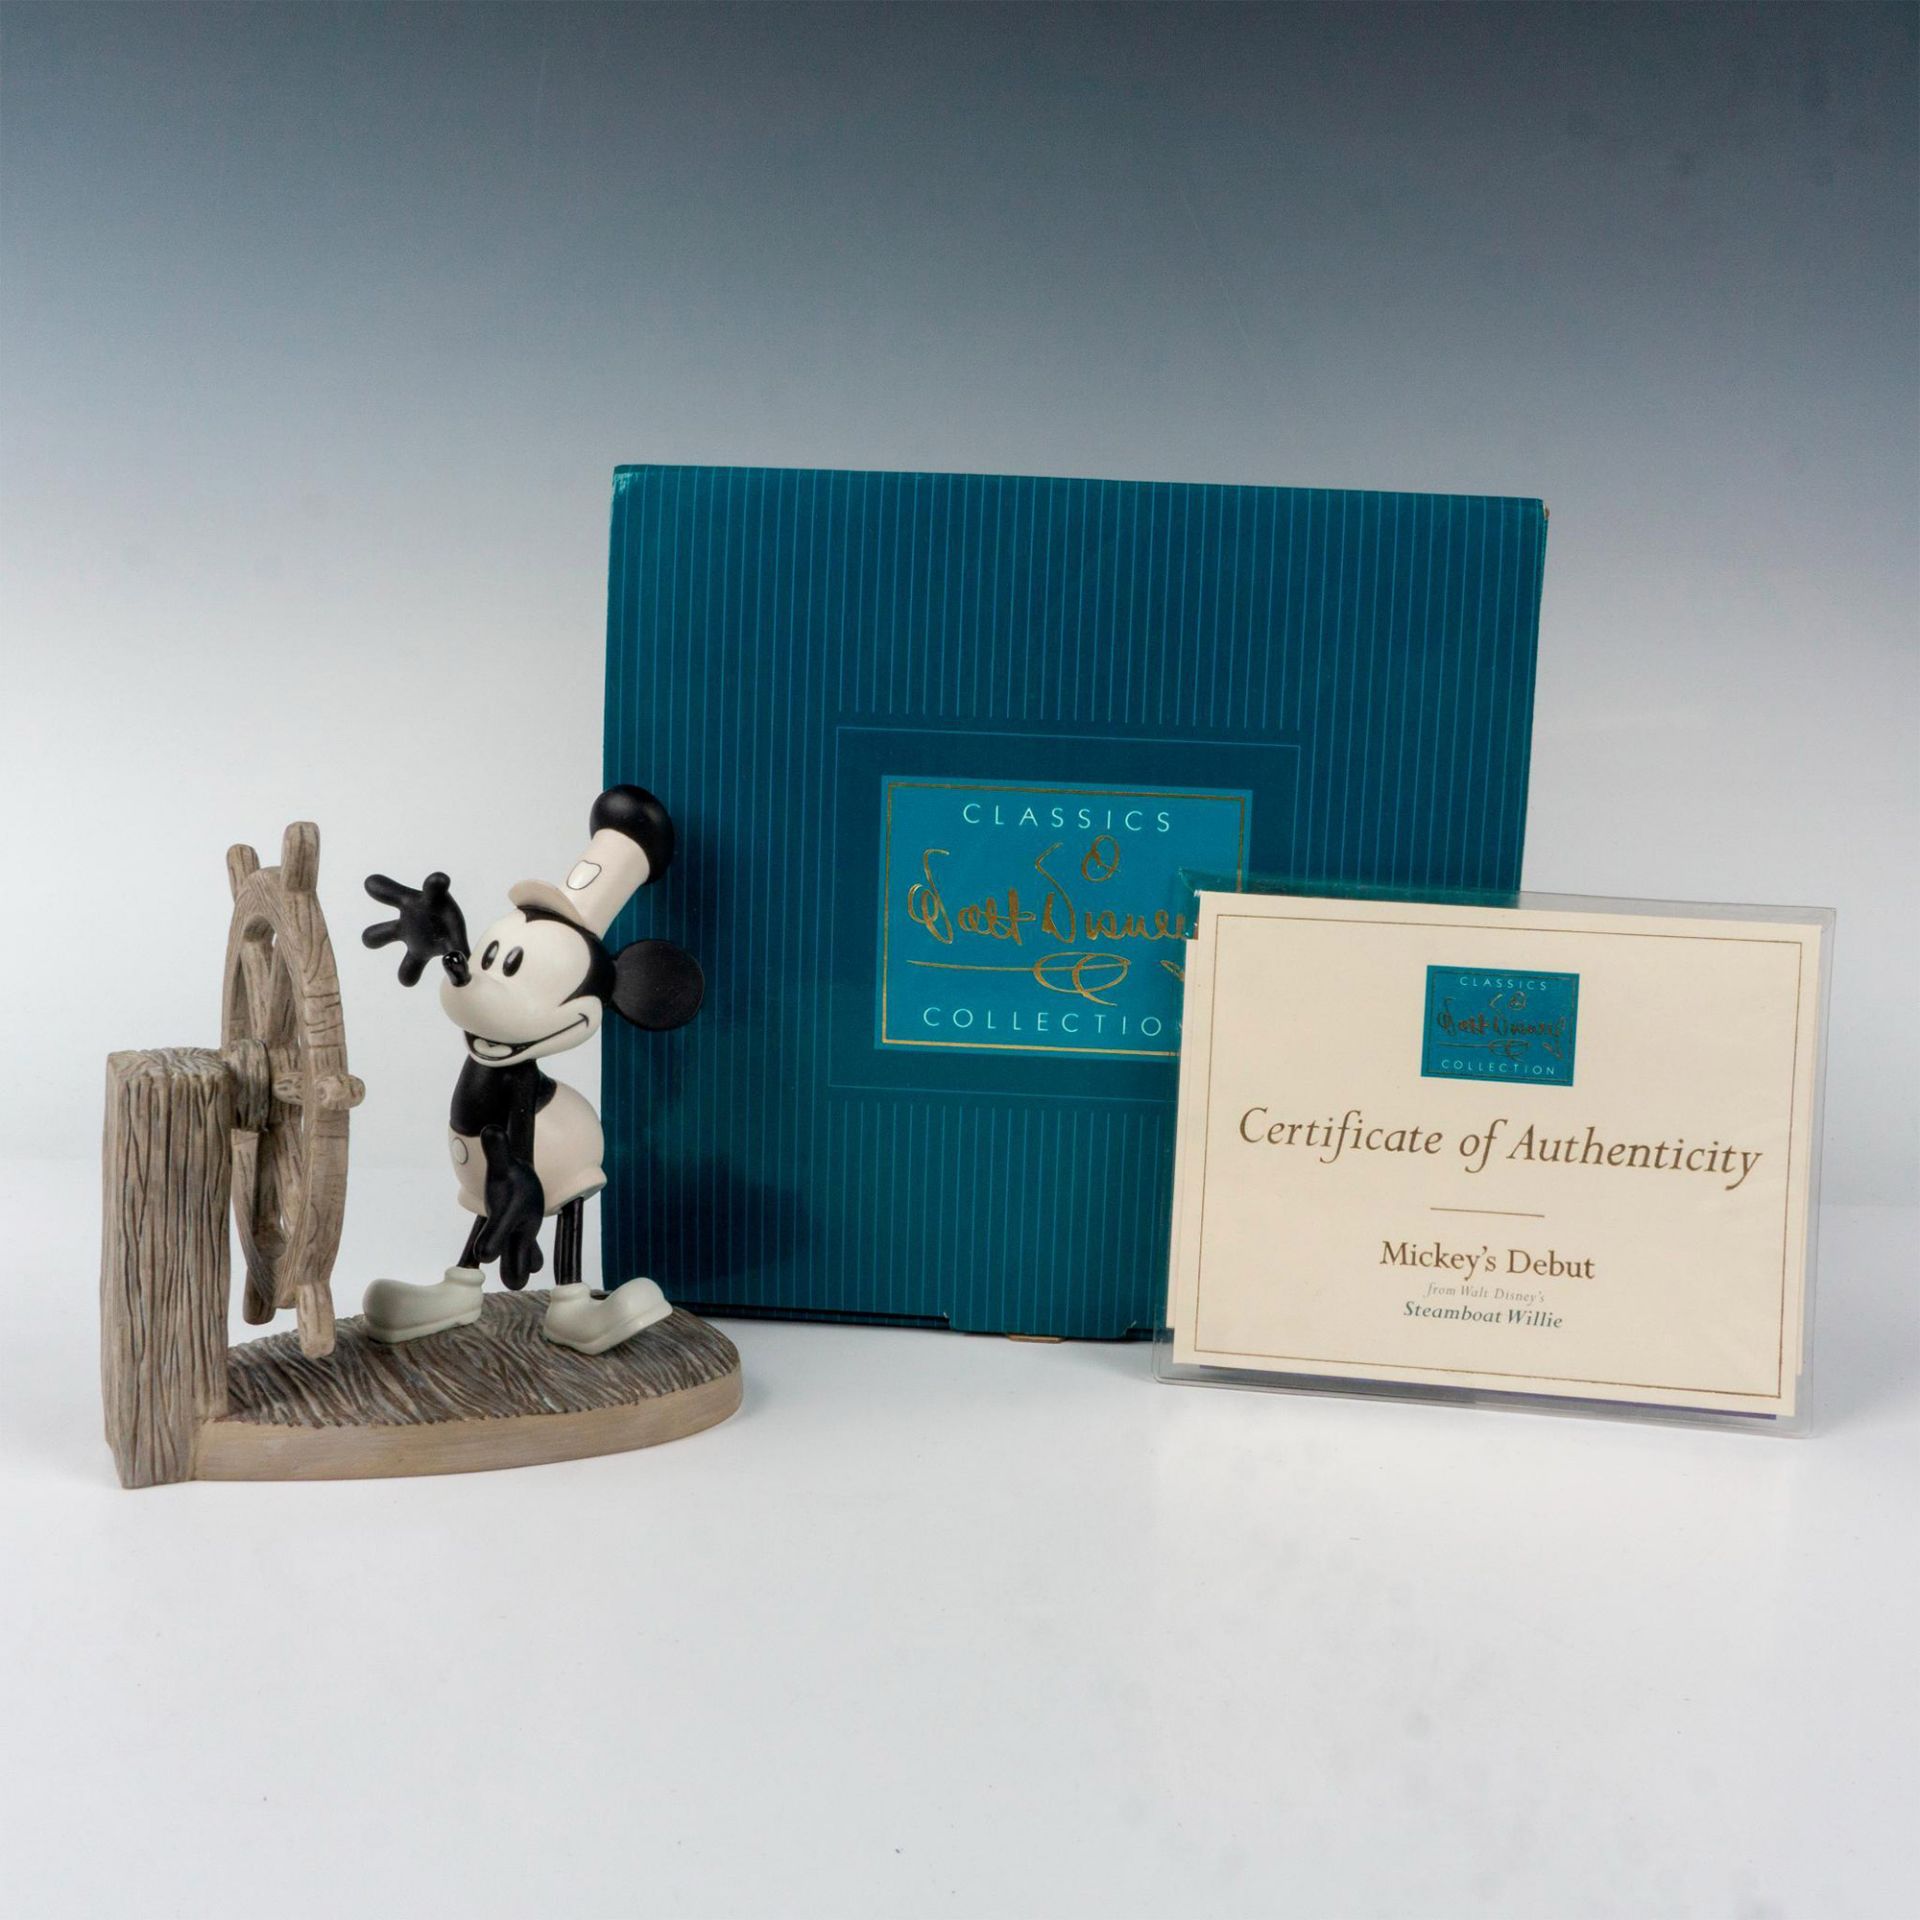 Walt Disney Classics Collection Figurine, Steamboat Willie - Image 4 of 4